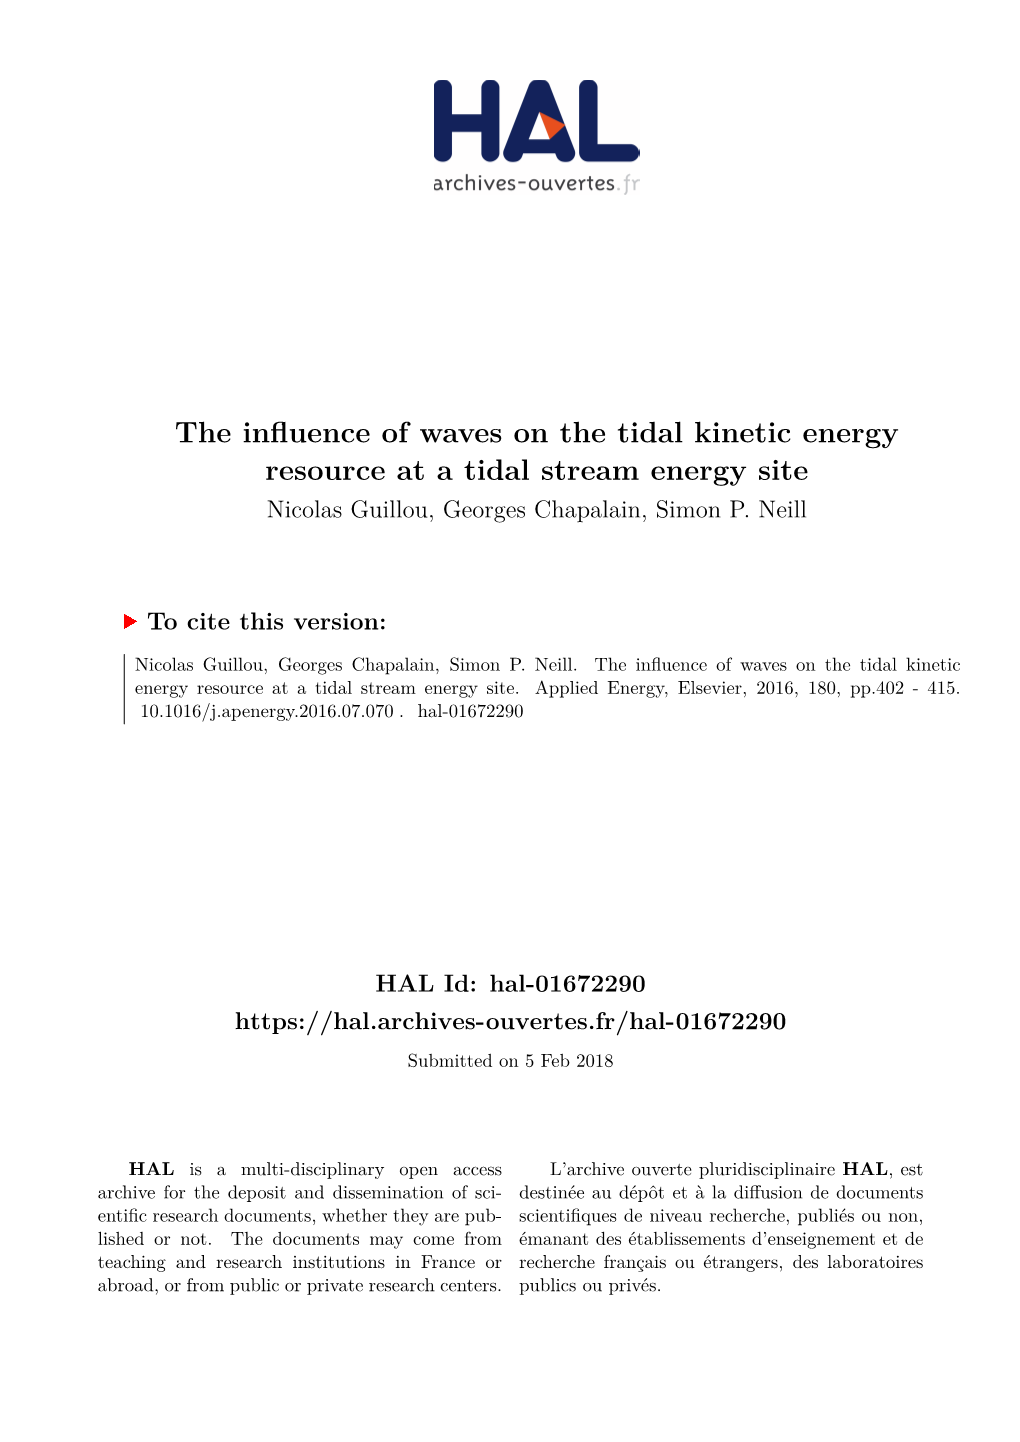 The Influence of Waves on the Tidal Kinetic Energy Resource at a Tidal Stream Energy Site Nicolas Guillou, Georges Chapalain, Simon P